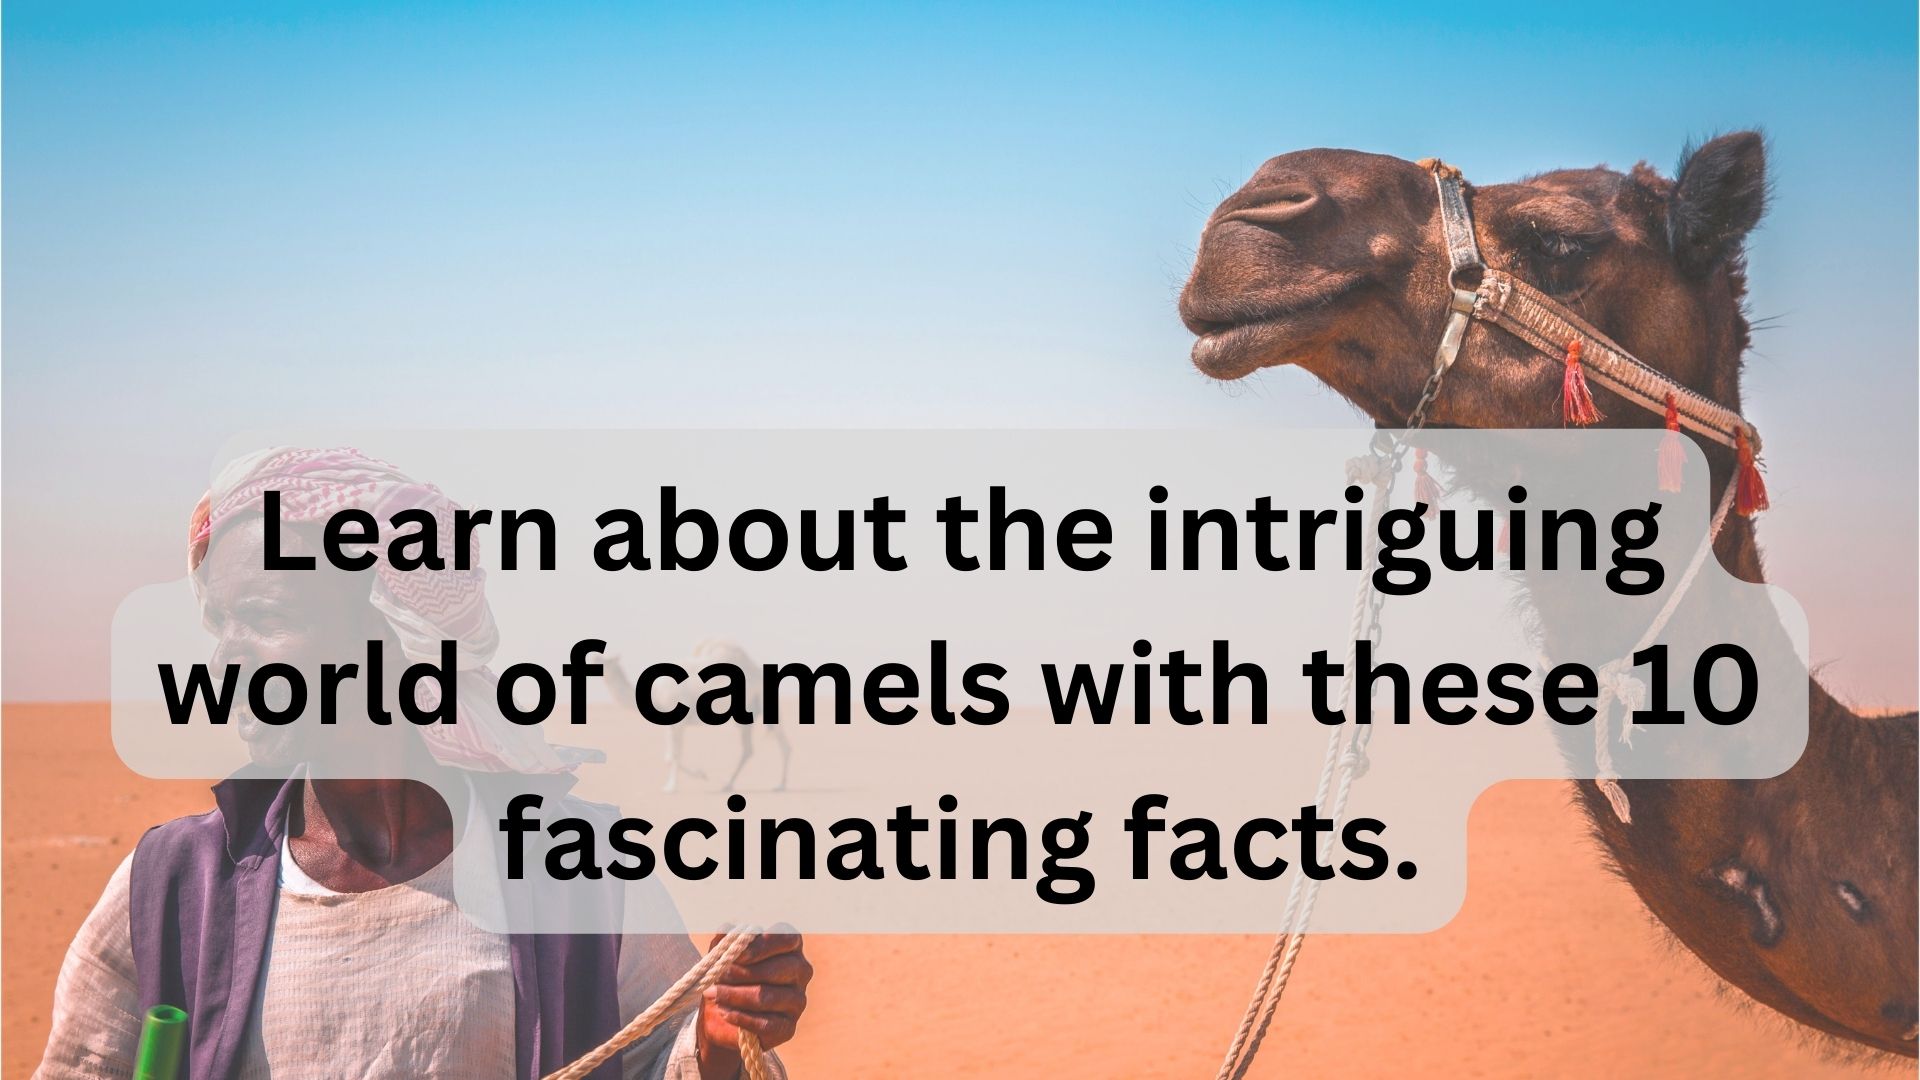 Learn-about-the-intriguing-world-of-camels-with-these-10-fascinating-facts